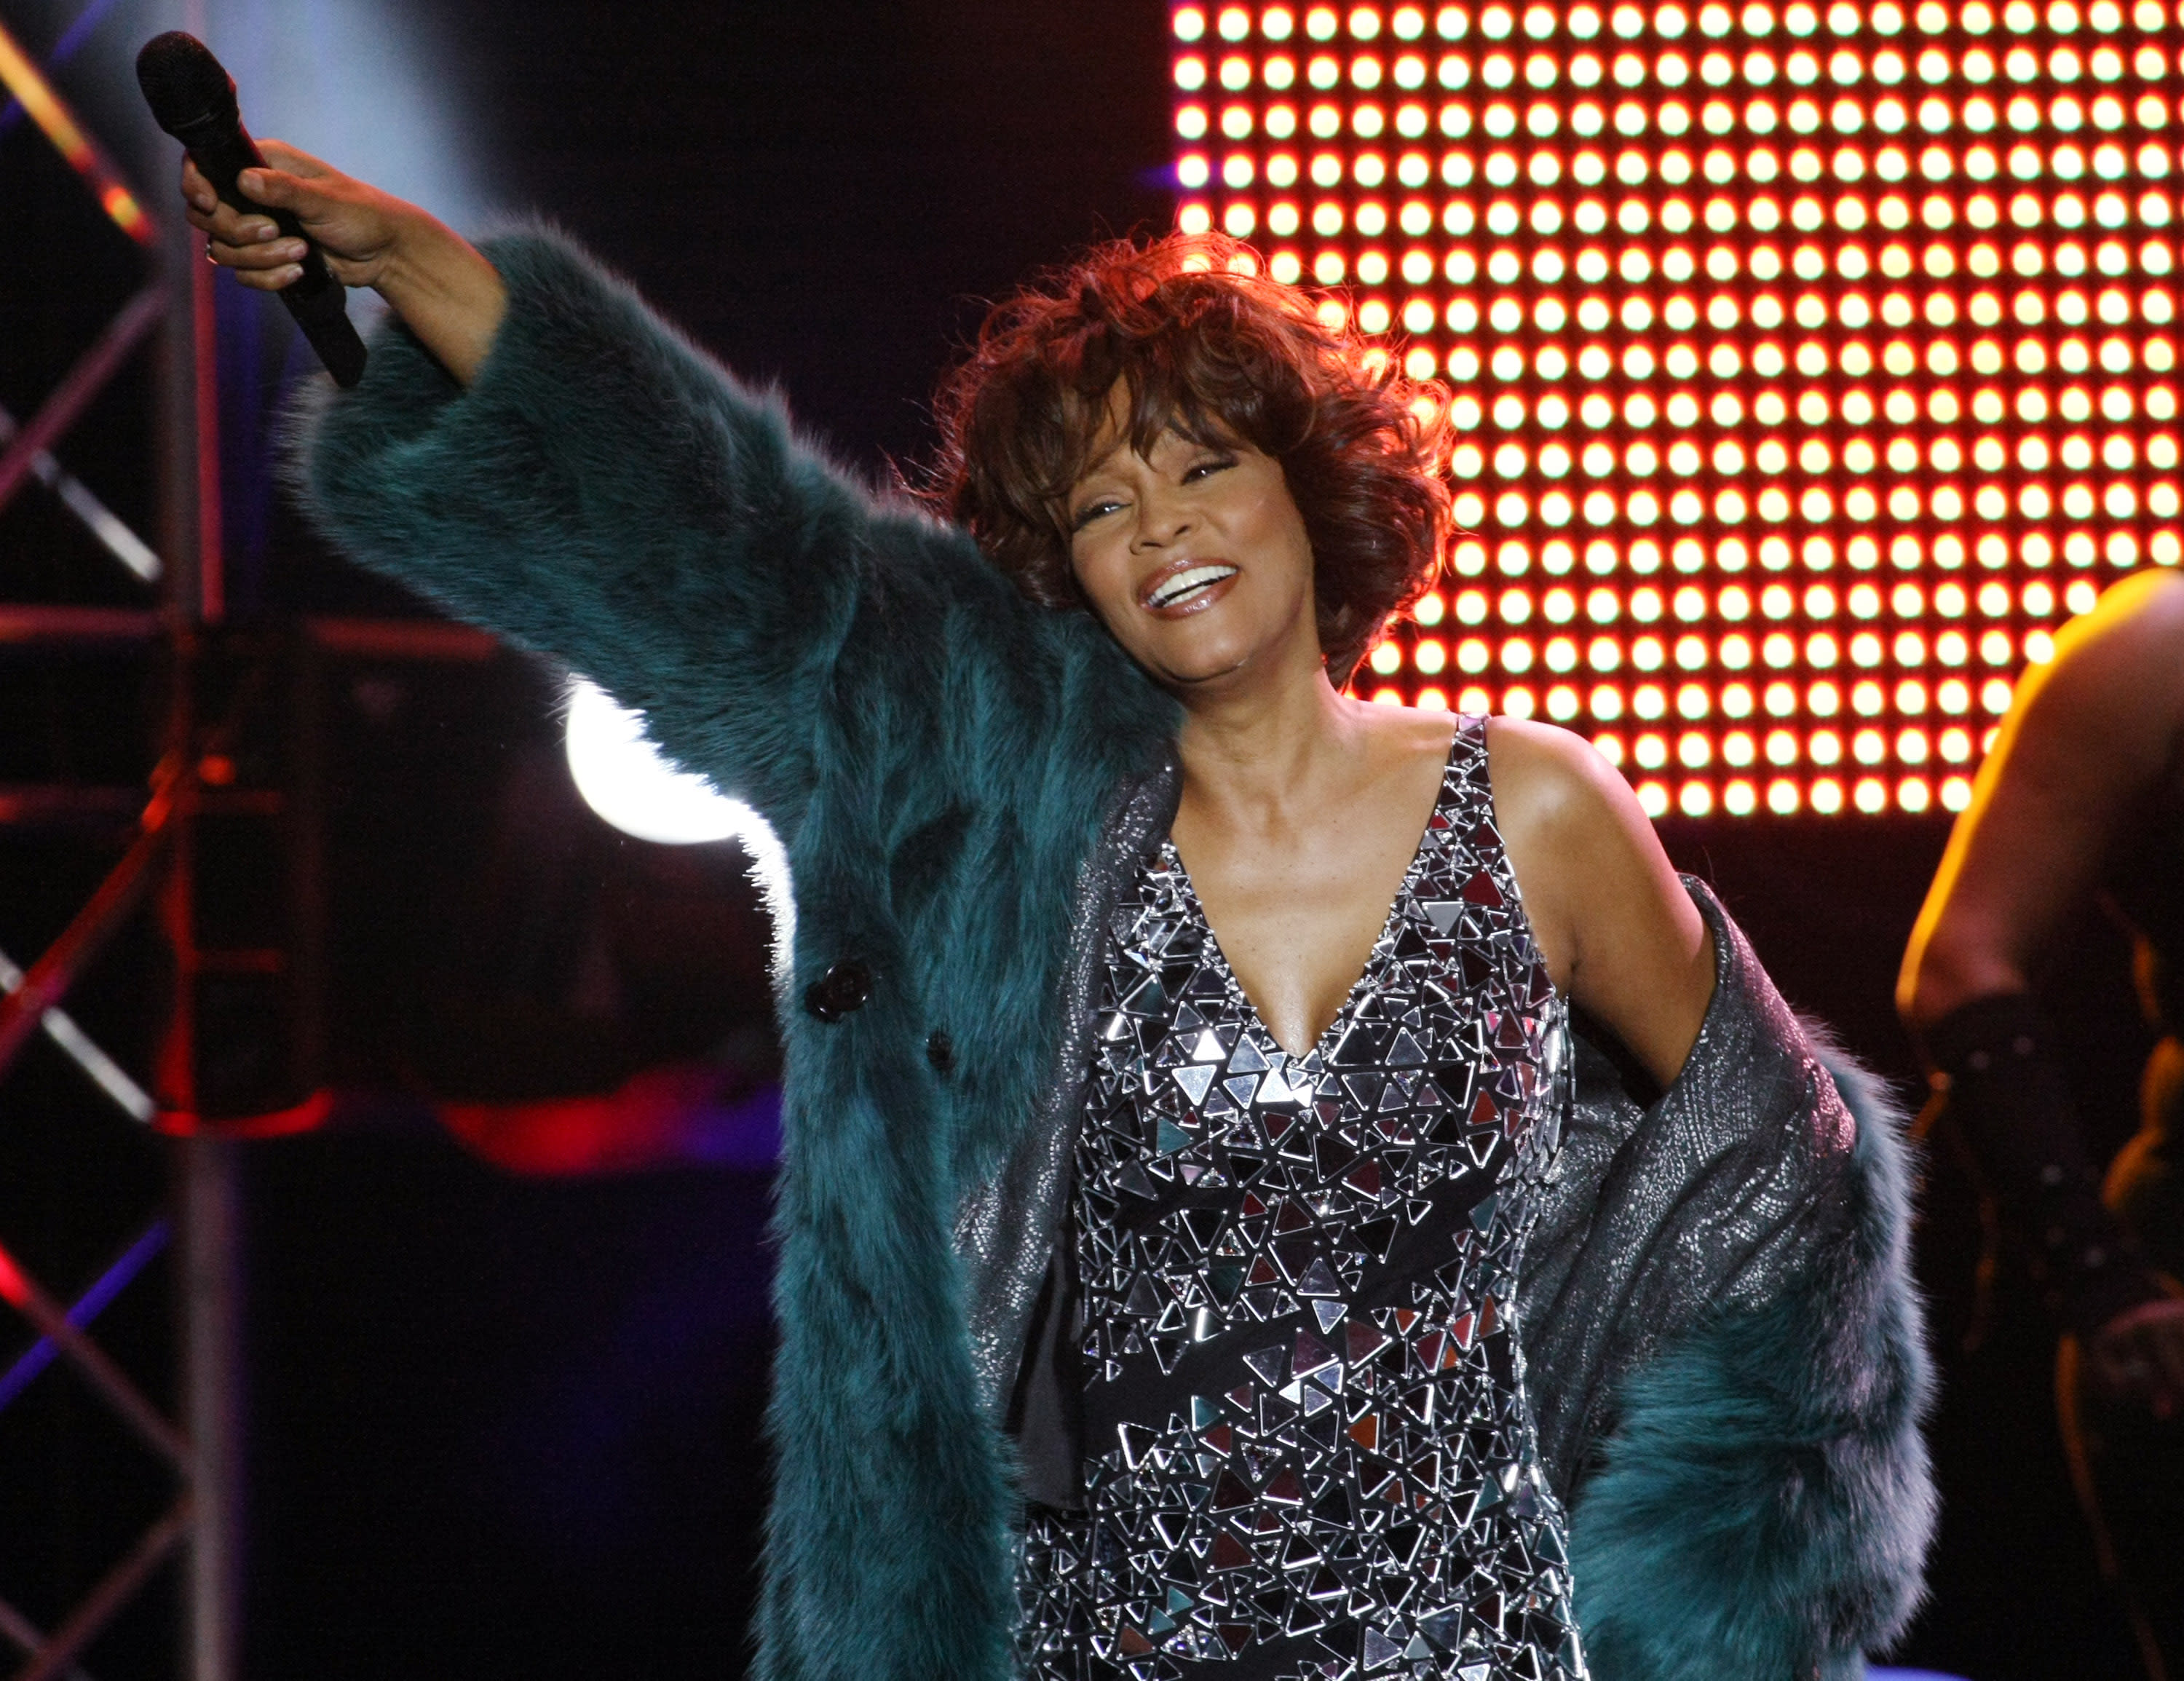 Whitney Houston hologram tour labelled 'creepy' and 'disrespectful' by